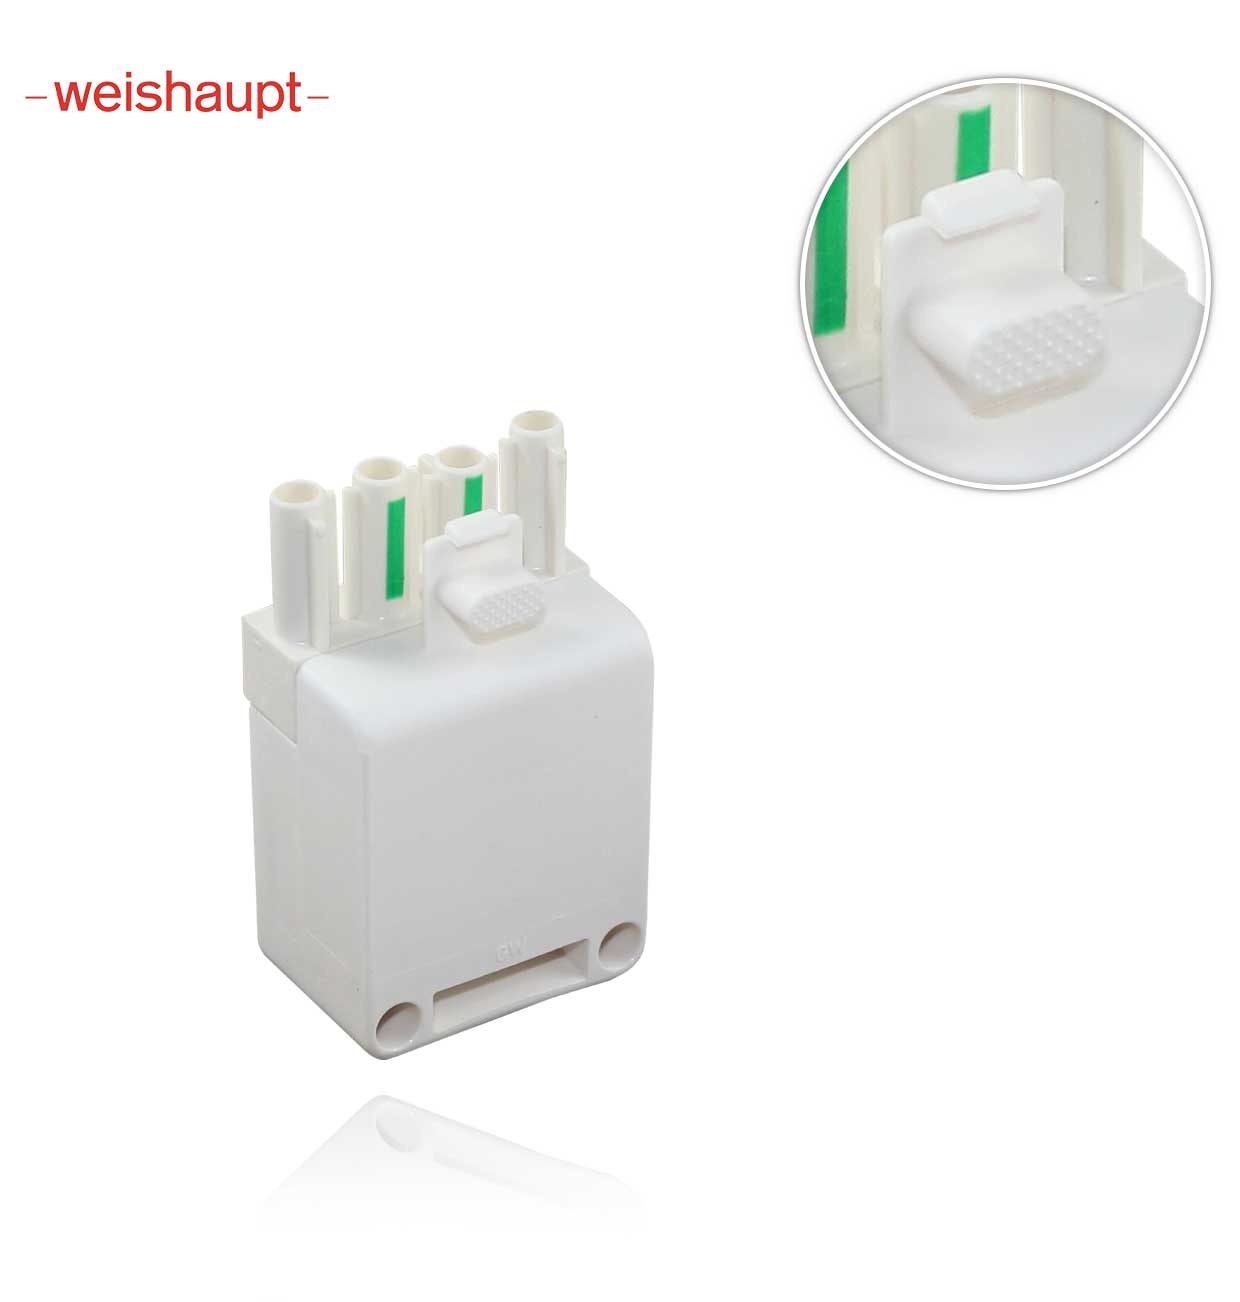 ST 18/4 WEISHAUPT MALE CONNECTOR